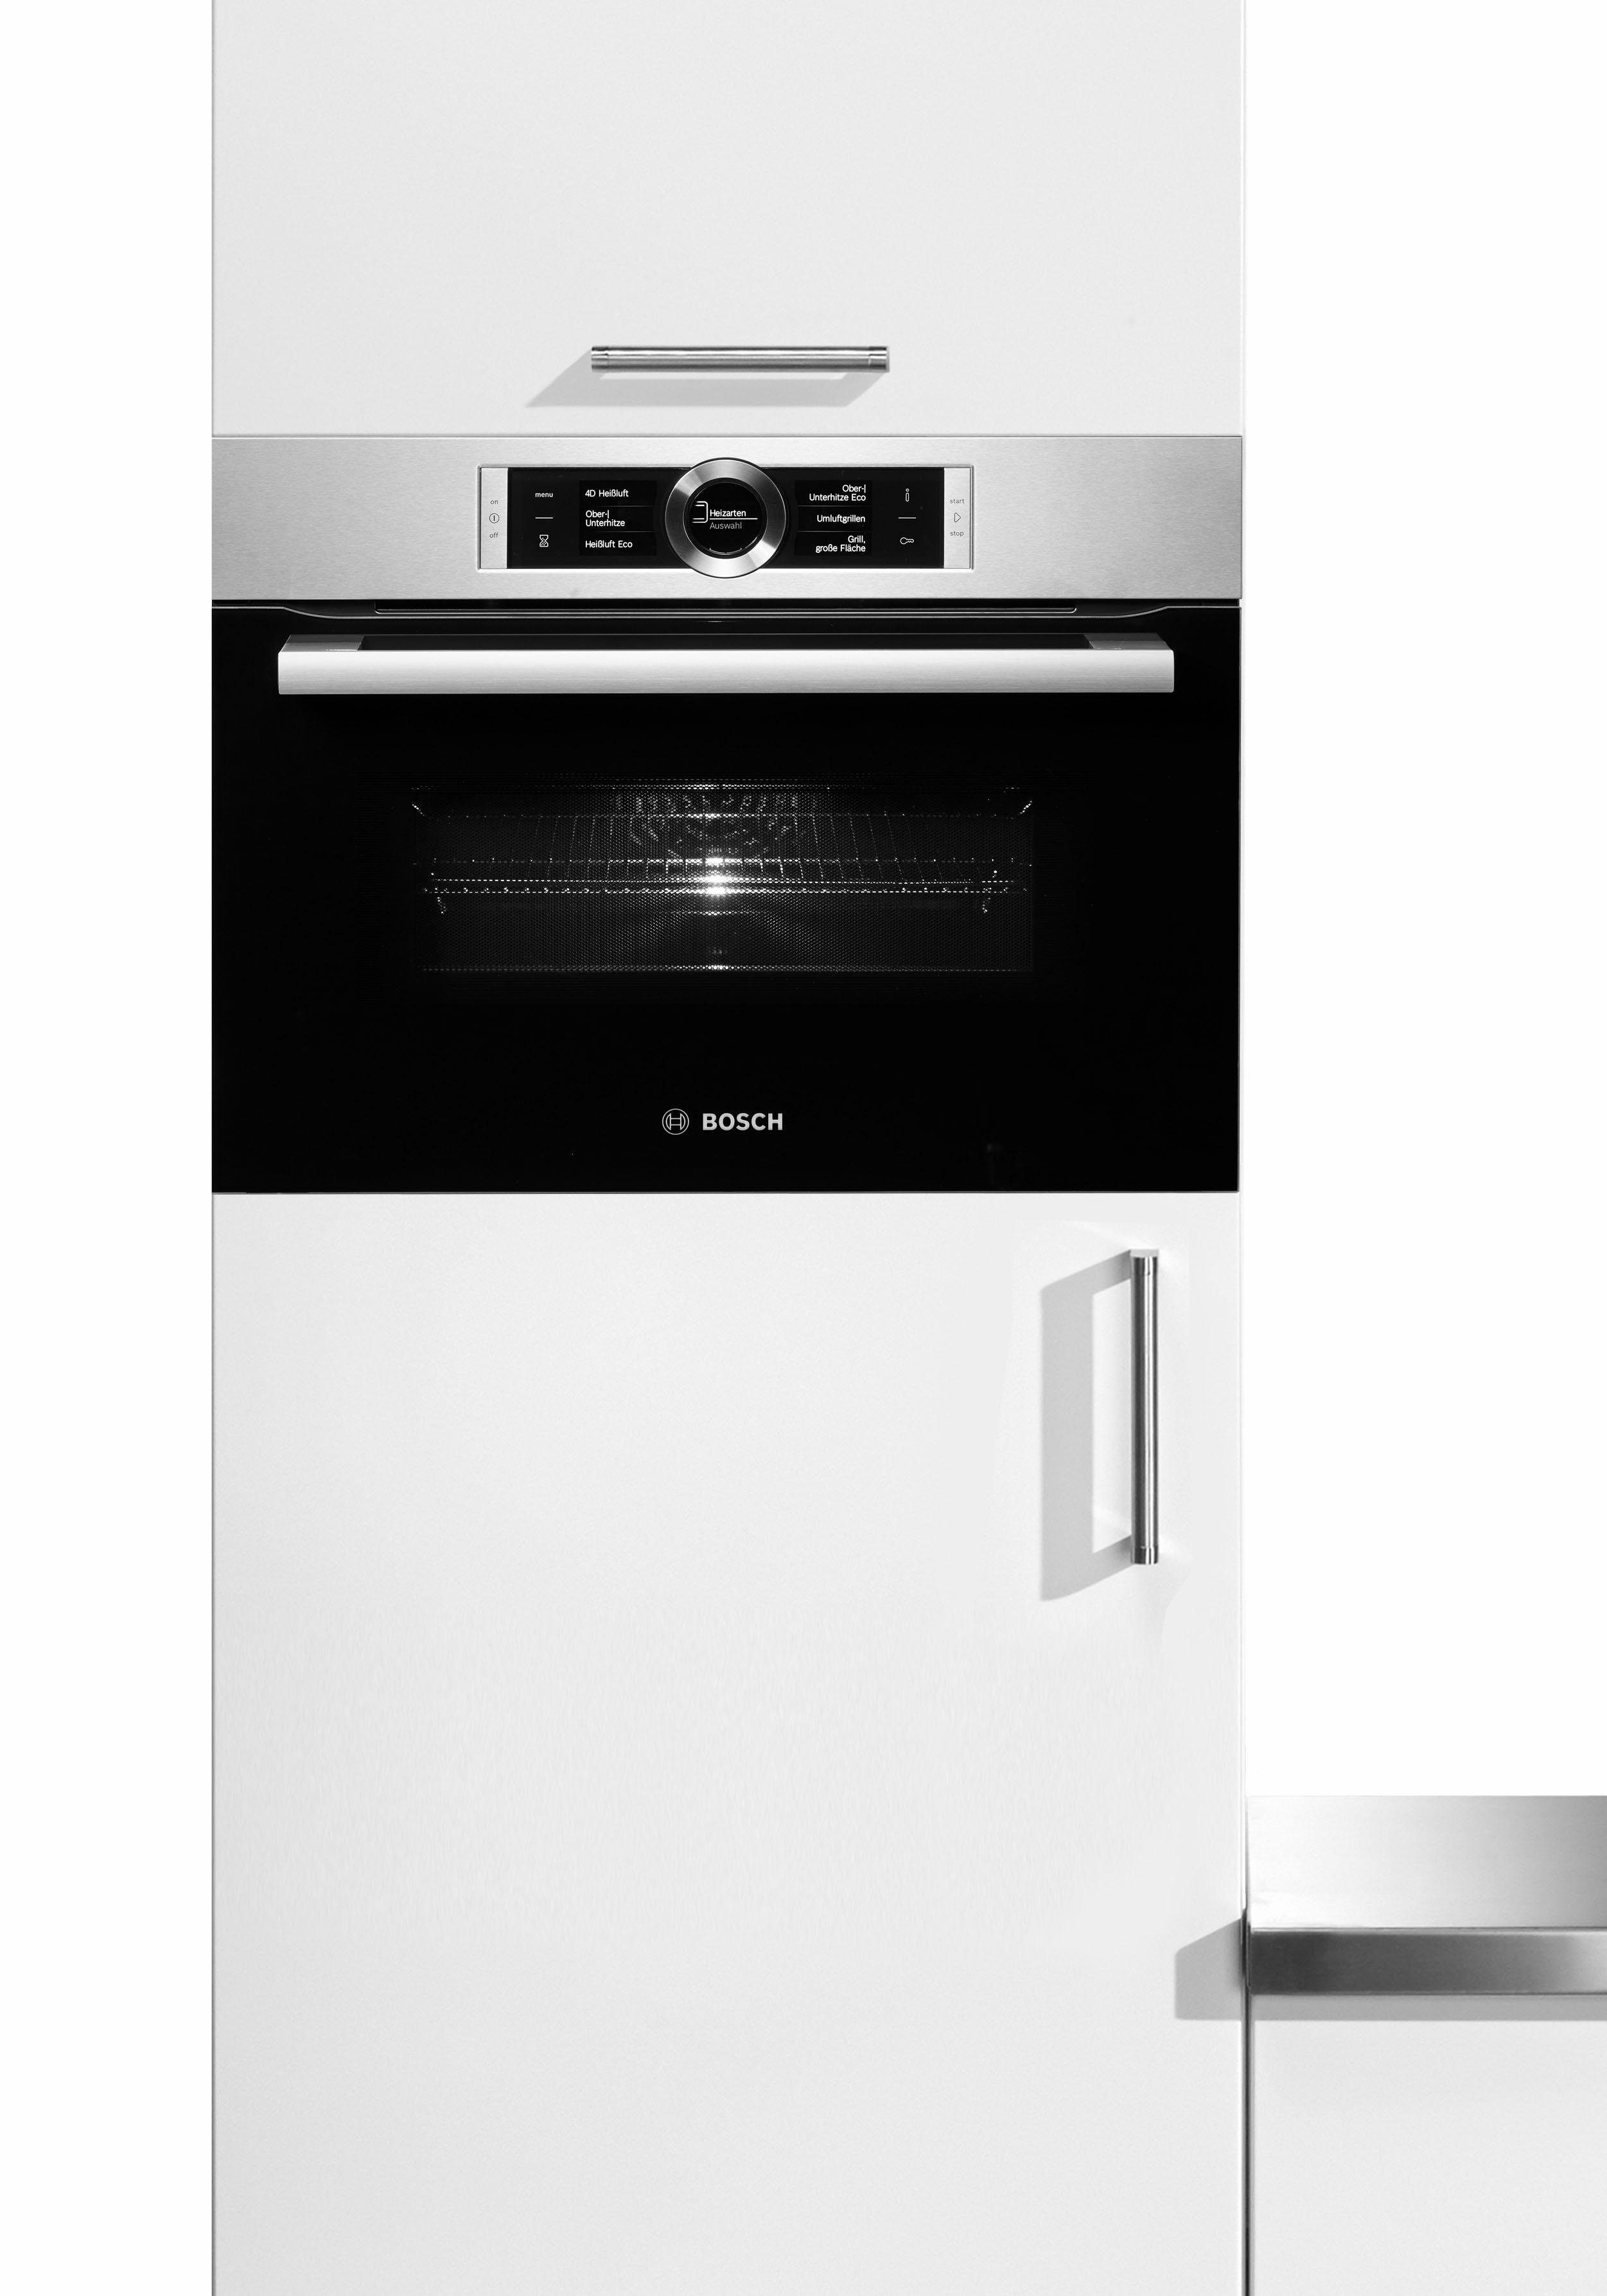 BOSCH Backofen mit Mikrowelle CMG636BS1, ecoClean Direct,  Mikrowellenfunktion